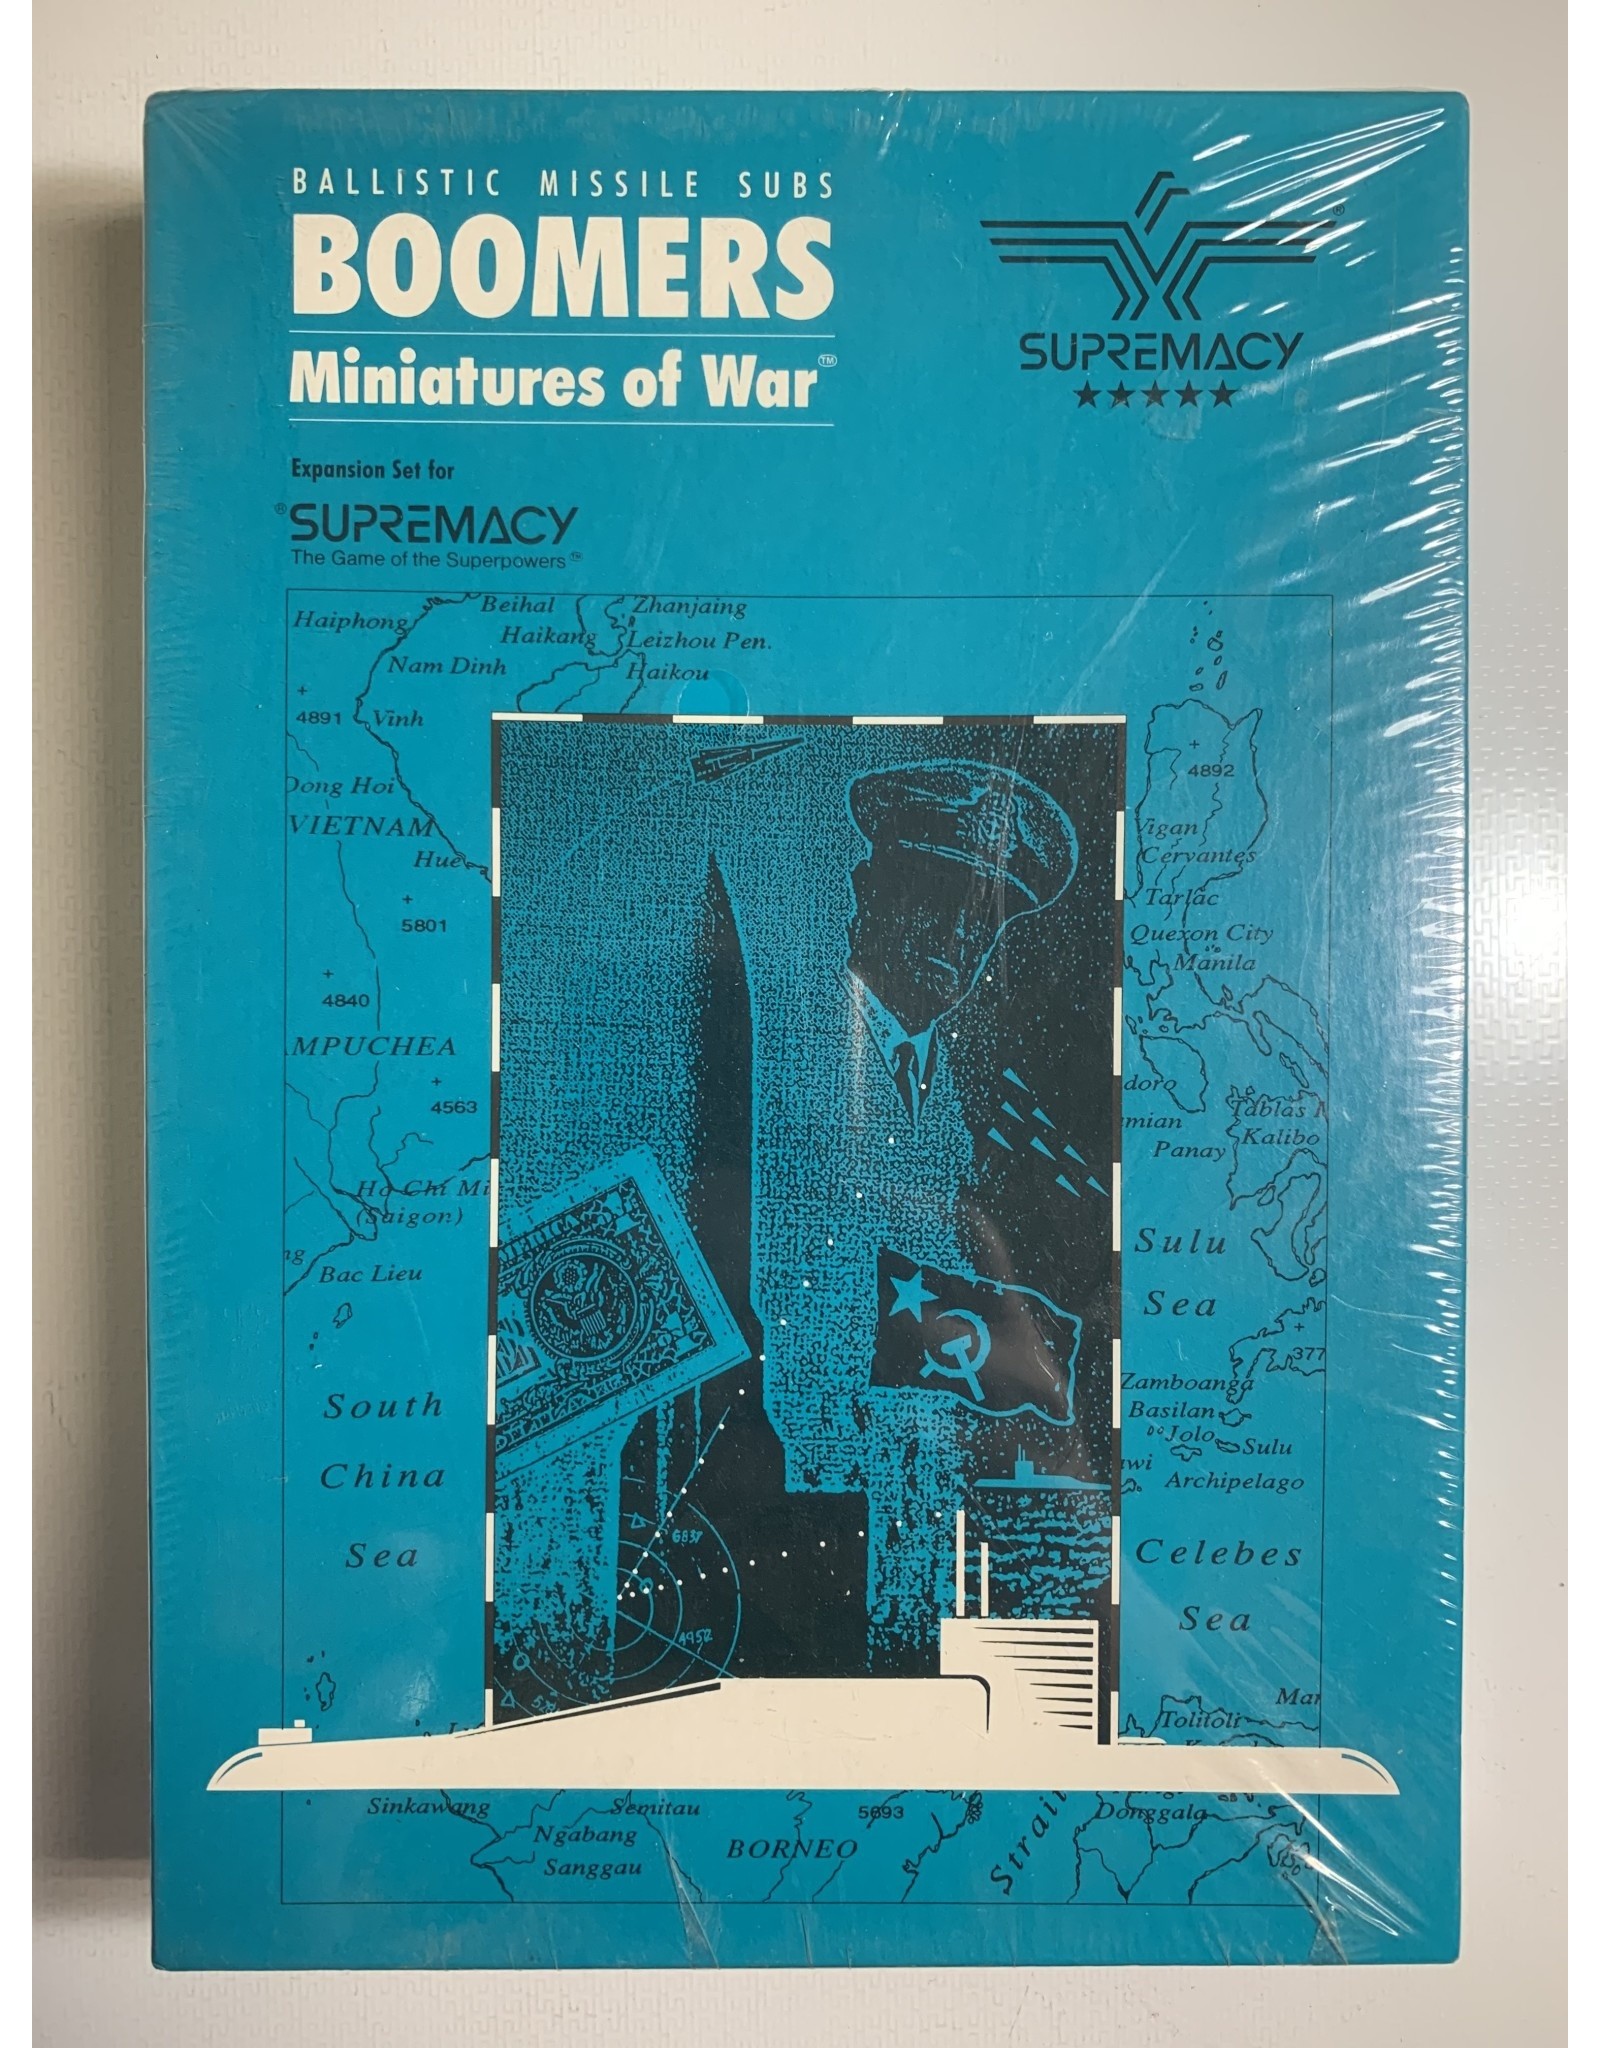 Supremacy Games Supremacy: Boomers - Ballistic Missile Subs (1990) NIS